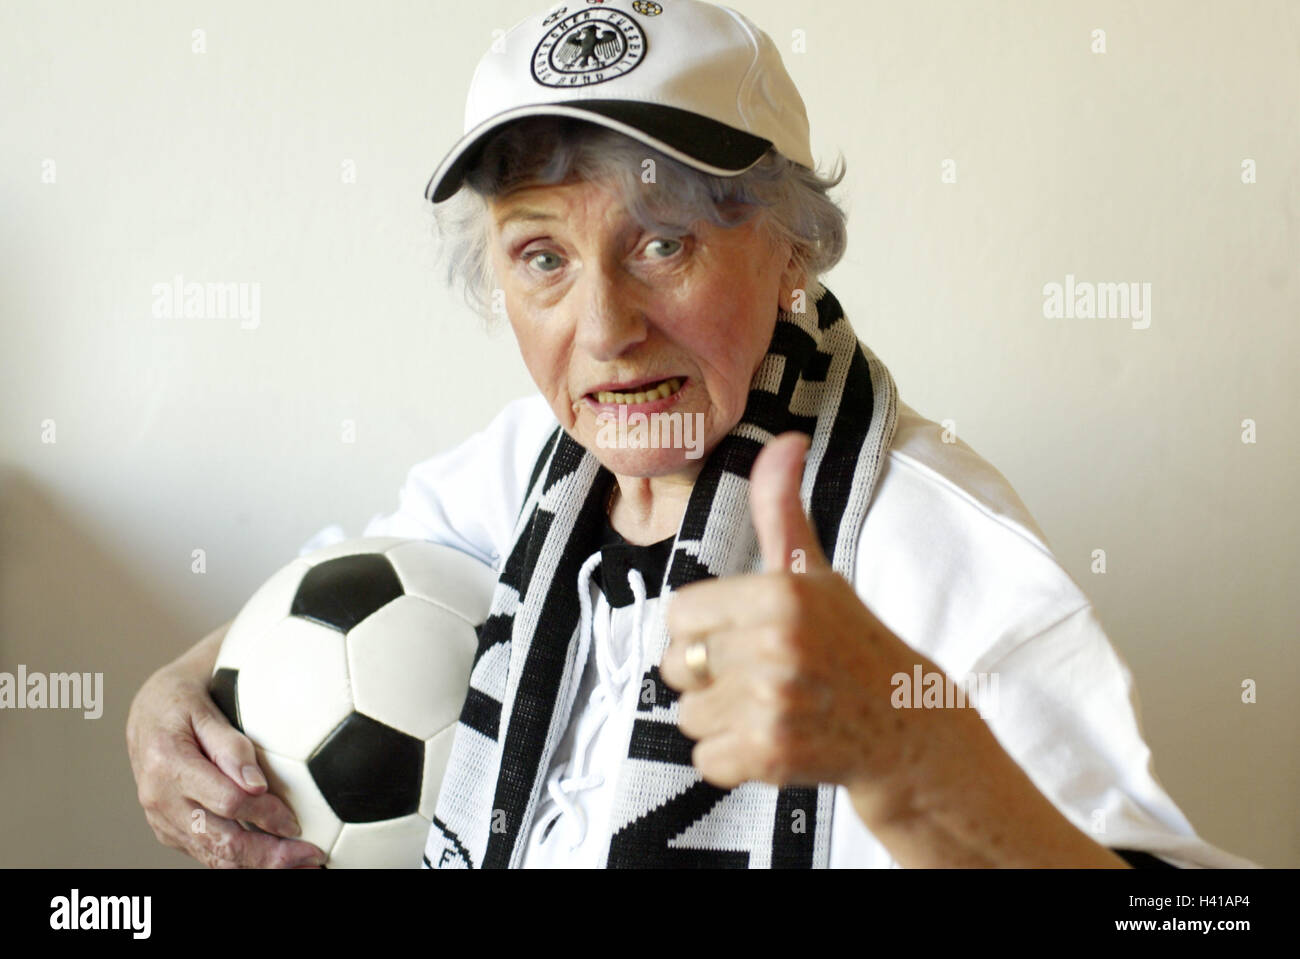 Senior, football fan, ball, gesture, pollex high, portrait, sport, football match, football match, spectator, senior, pensioner, woman, old, agile, actively, young remaining, fan, follower, football follower, hobby, keen on sport, excitedly, employs, is c Stock Photo